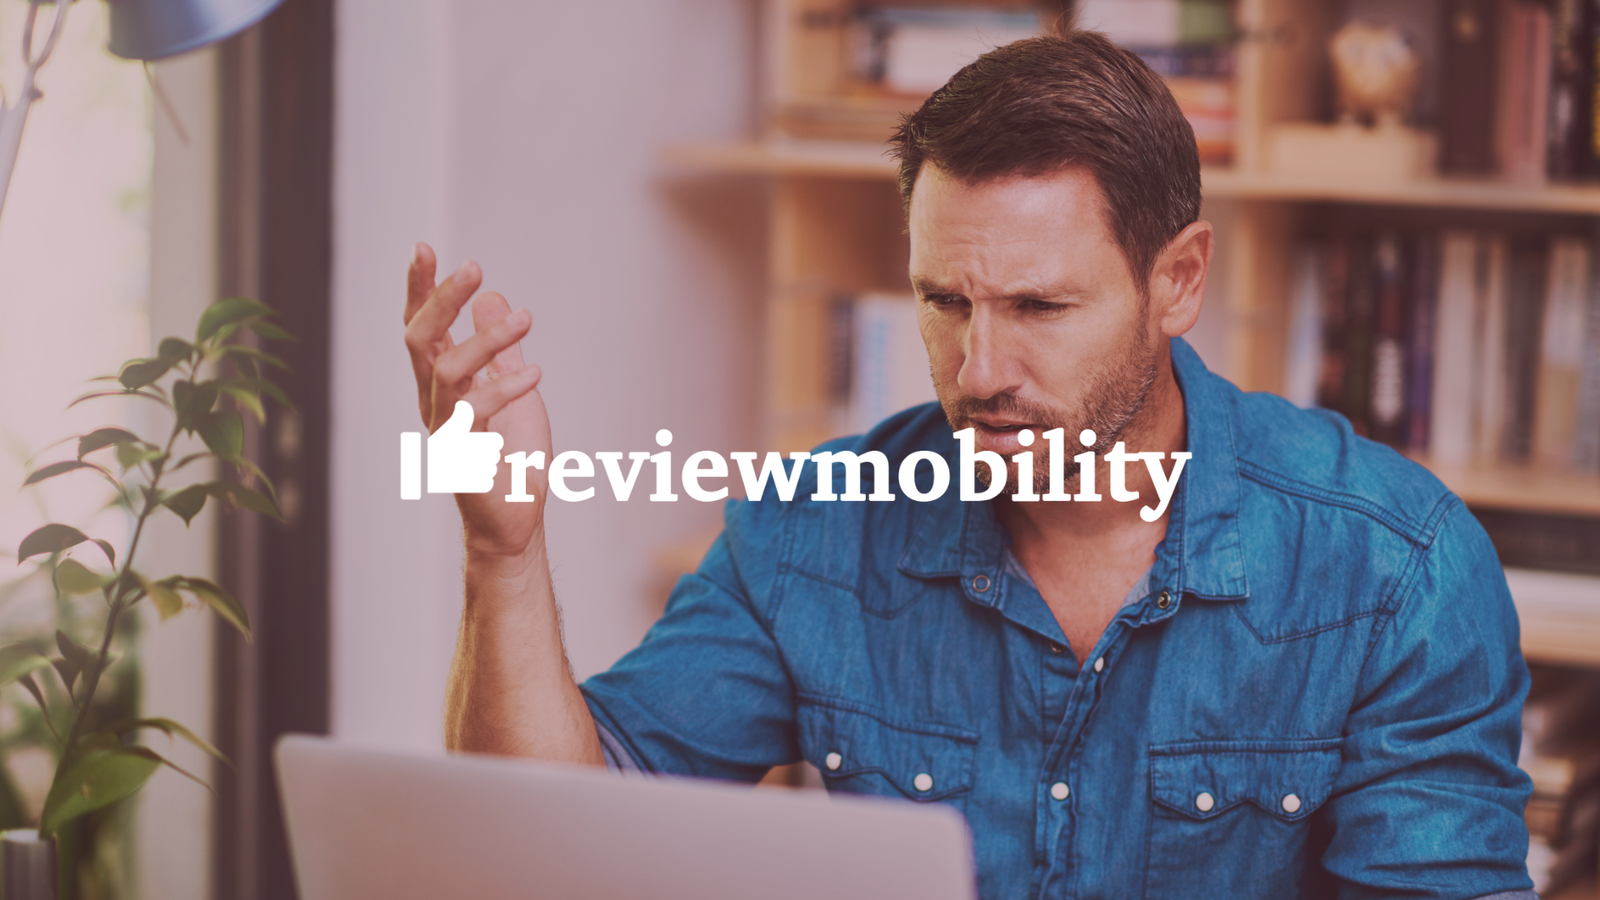 What Happens If You Misuse A Review Mobility Profile?